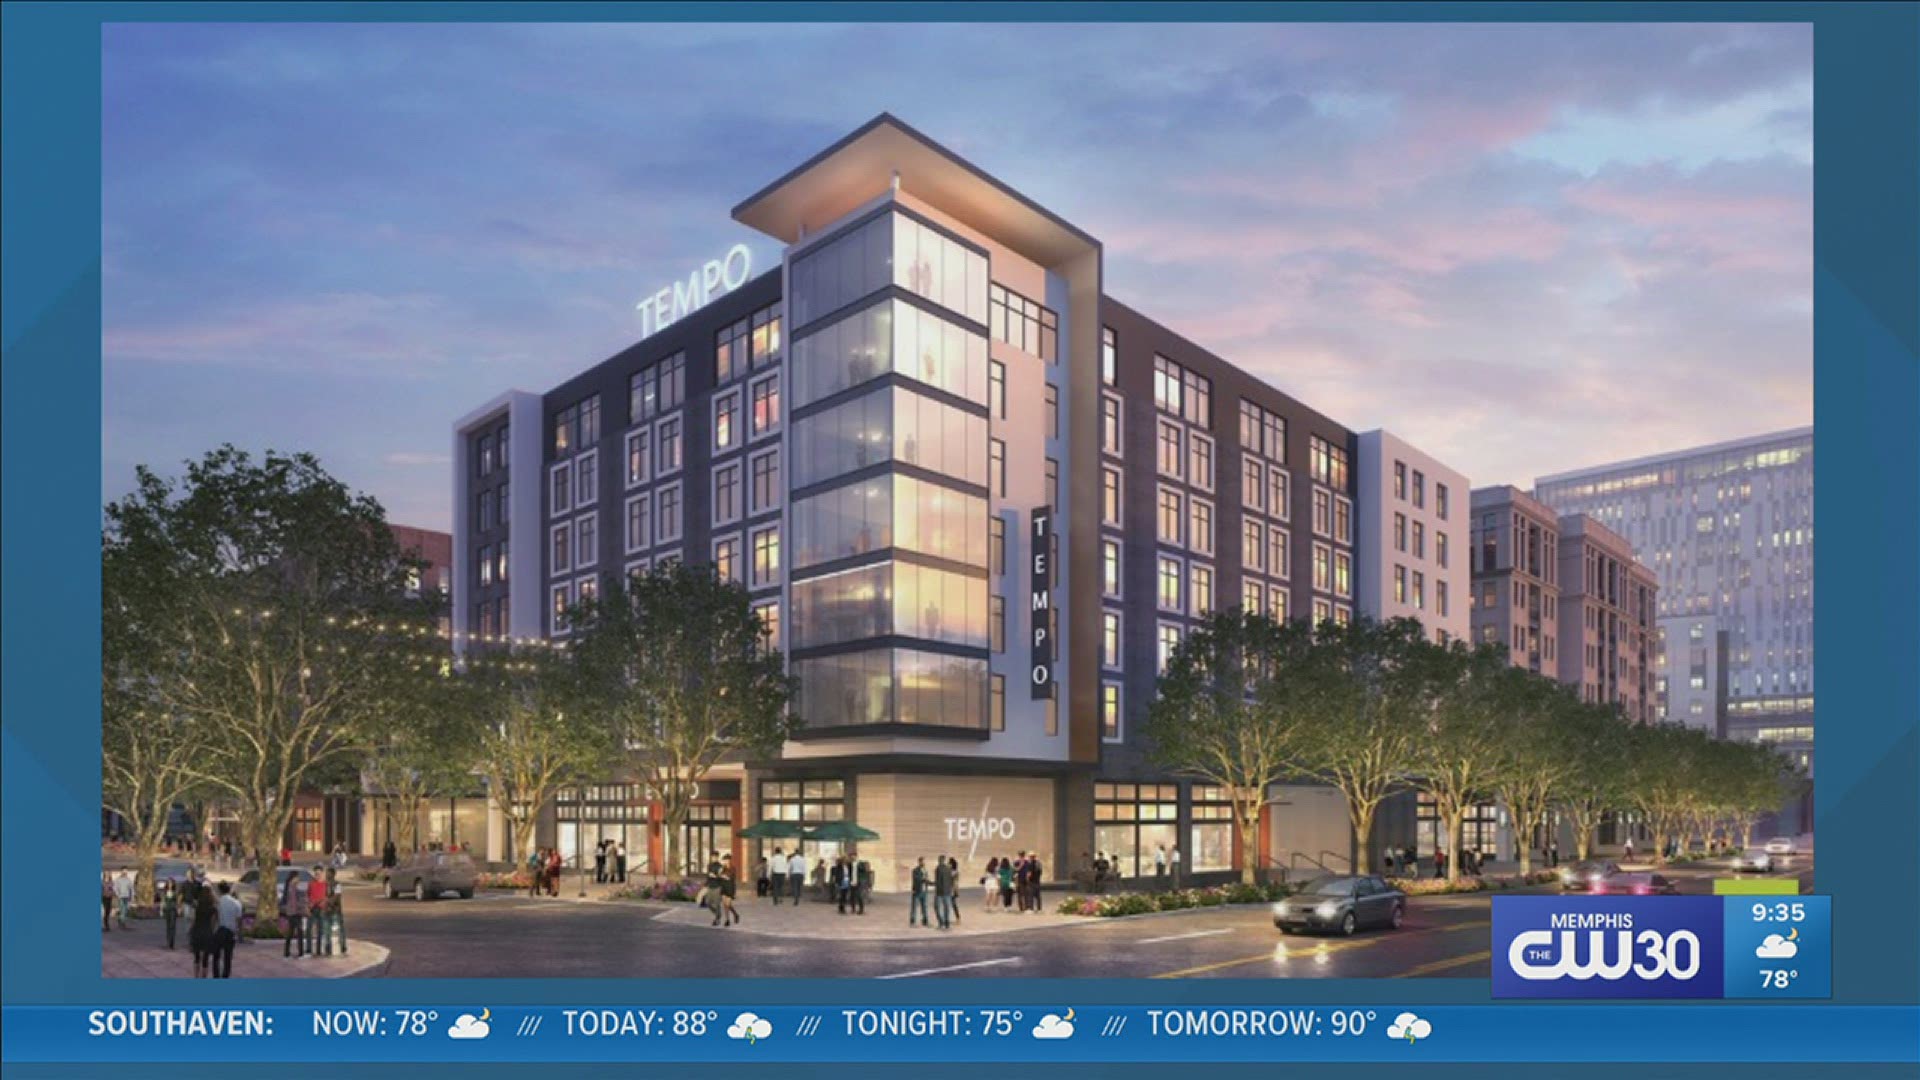 The company said Tempo by Hilton and Embassy Suites by Hilton will open at The Walk on Union in 2023 in downtown Memphis.